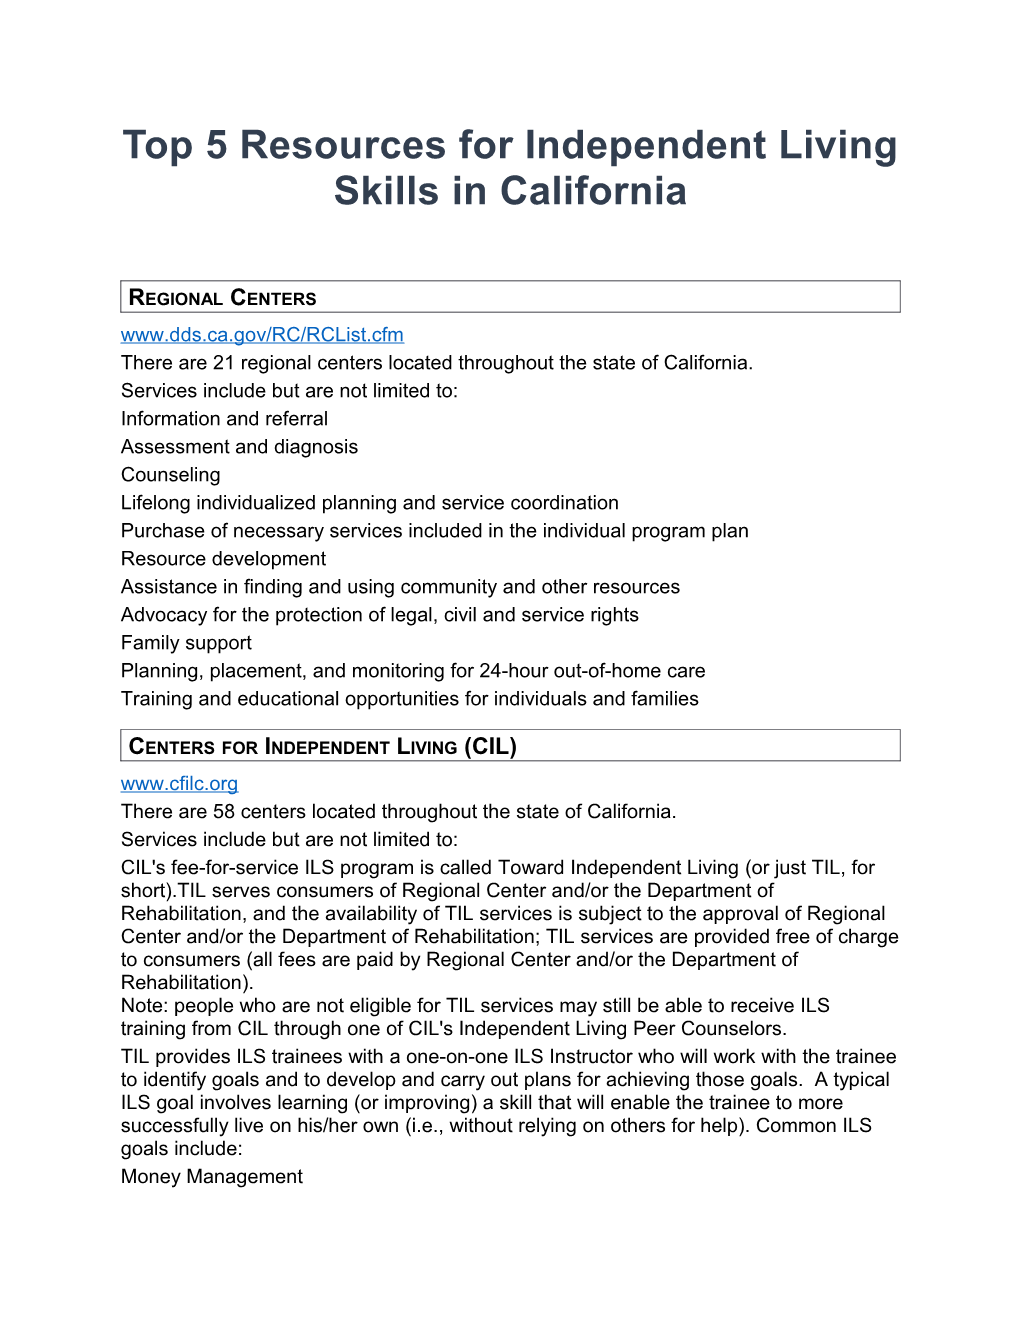 Top 5Resources for Independent Living Skills in California